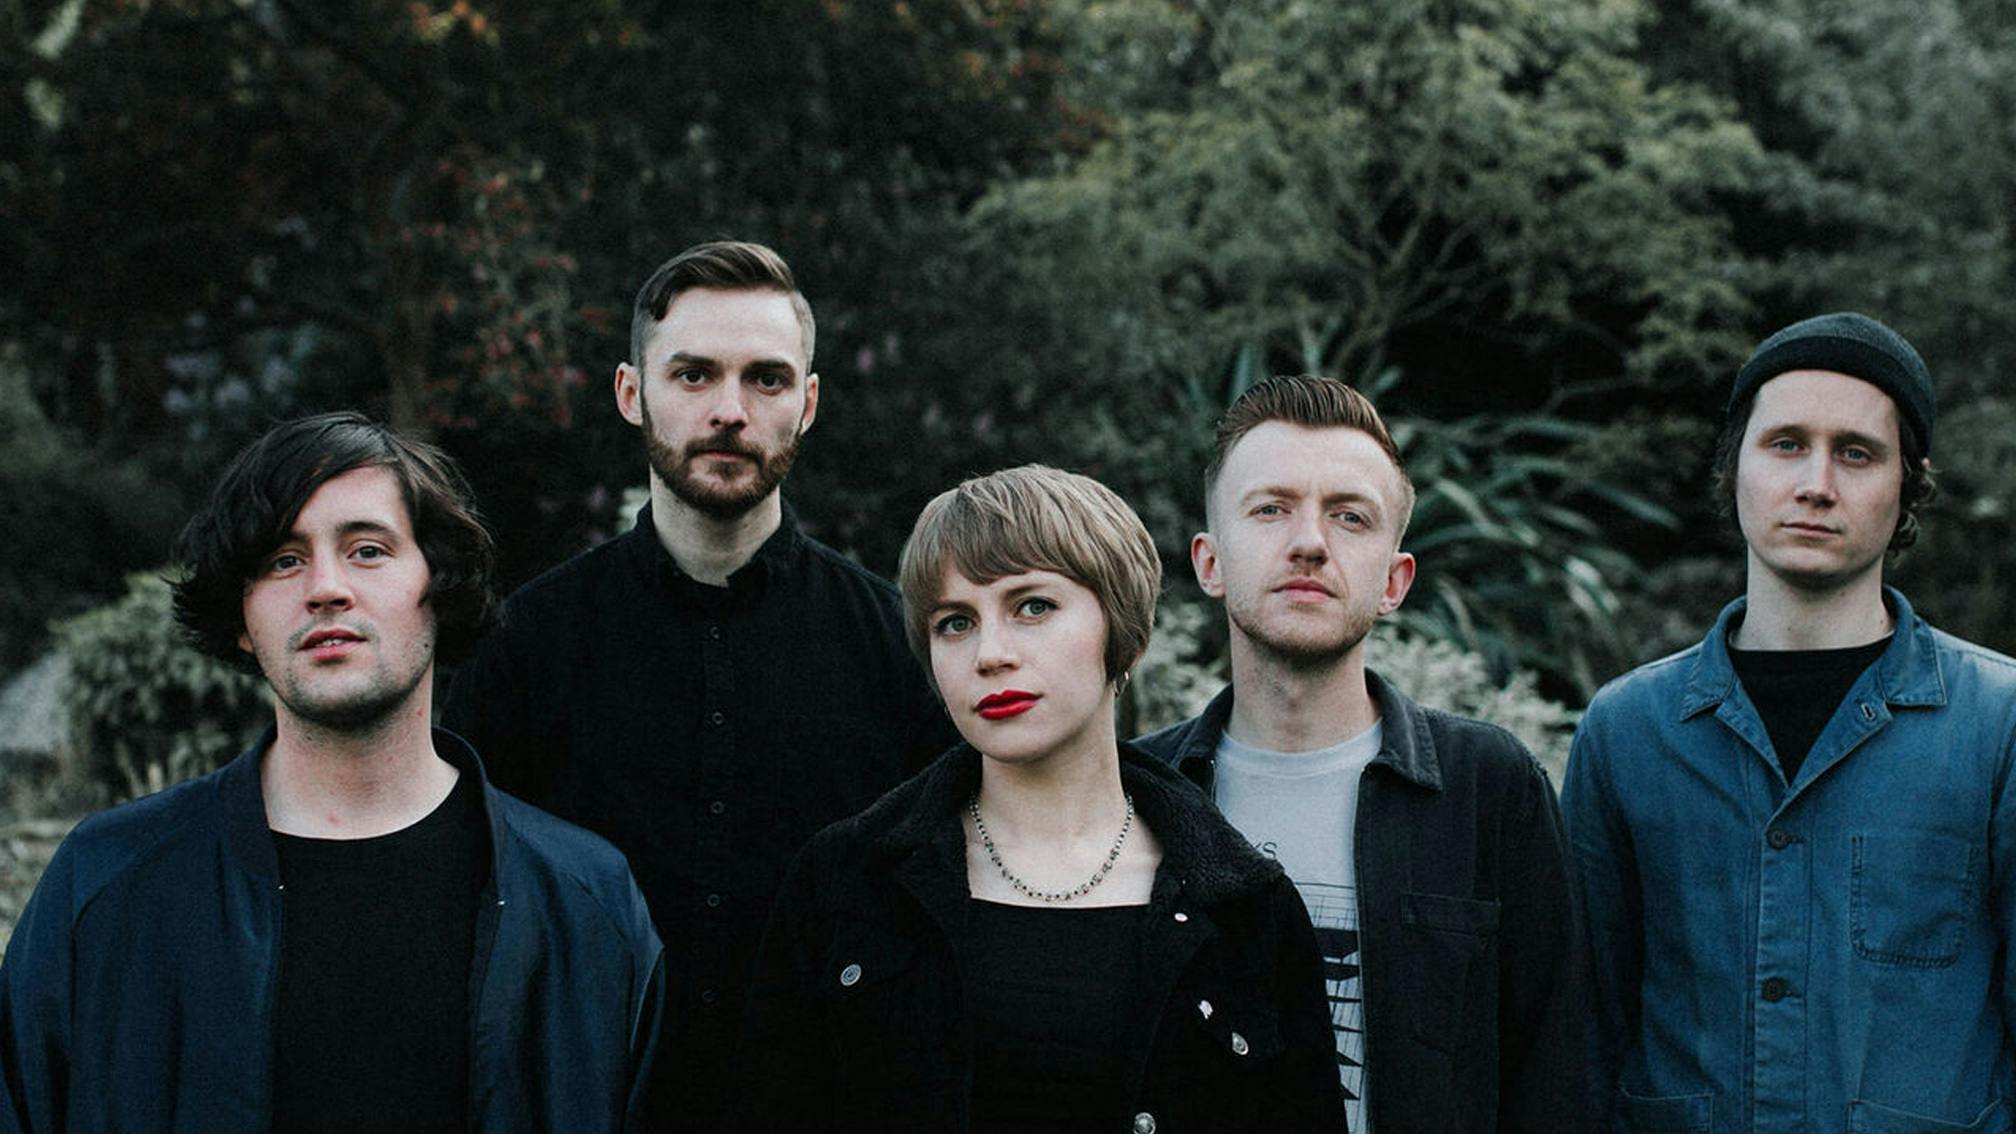 Rolo Tomassi “End Relationship” With Holy Roar Records After Label’s Founder Is Accused Of Sexual Abuse